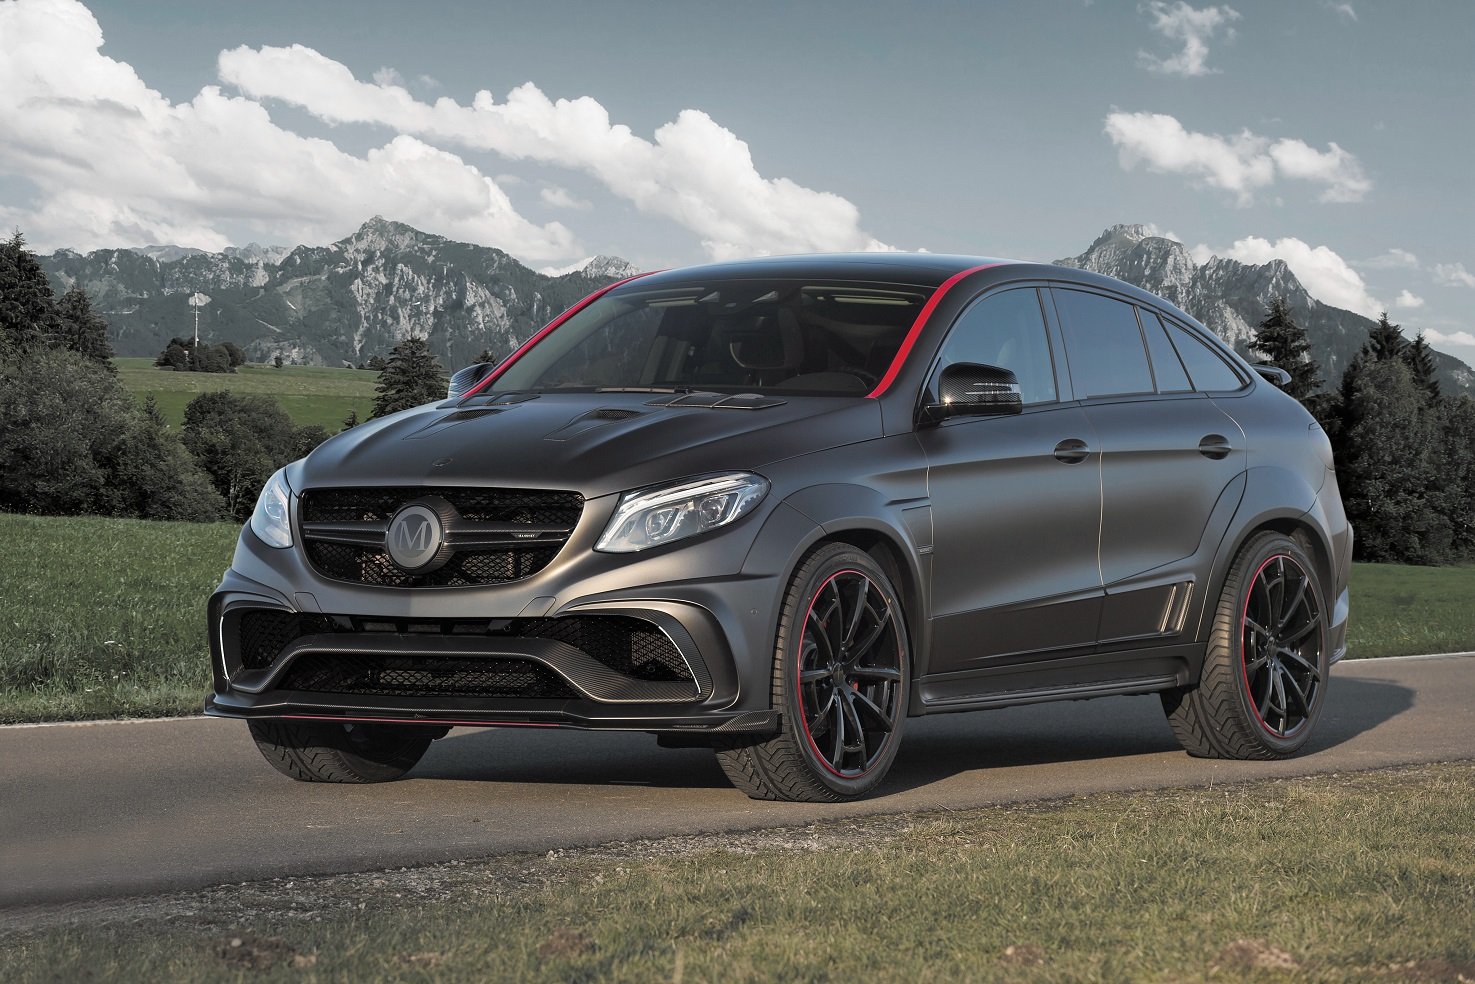 mansory, Mercedes, Amg, Gle, 63, 4matic, Coupe,  c292 , Cars, Suv, Modified, Black, 2016 Wallpaper